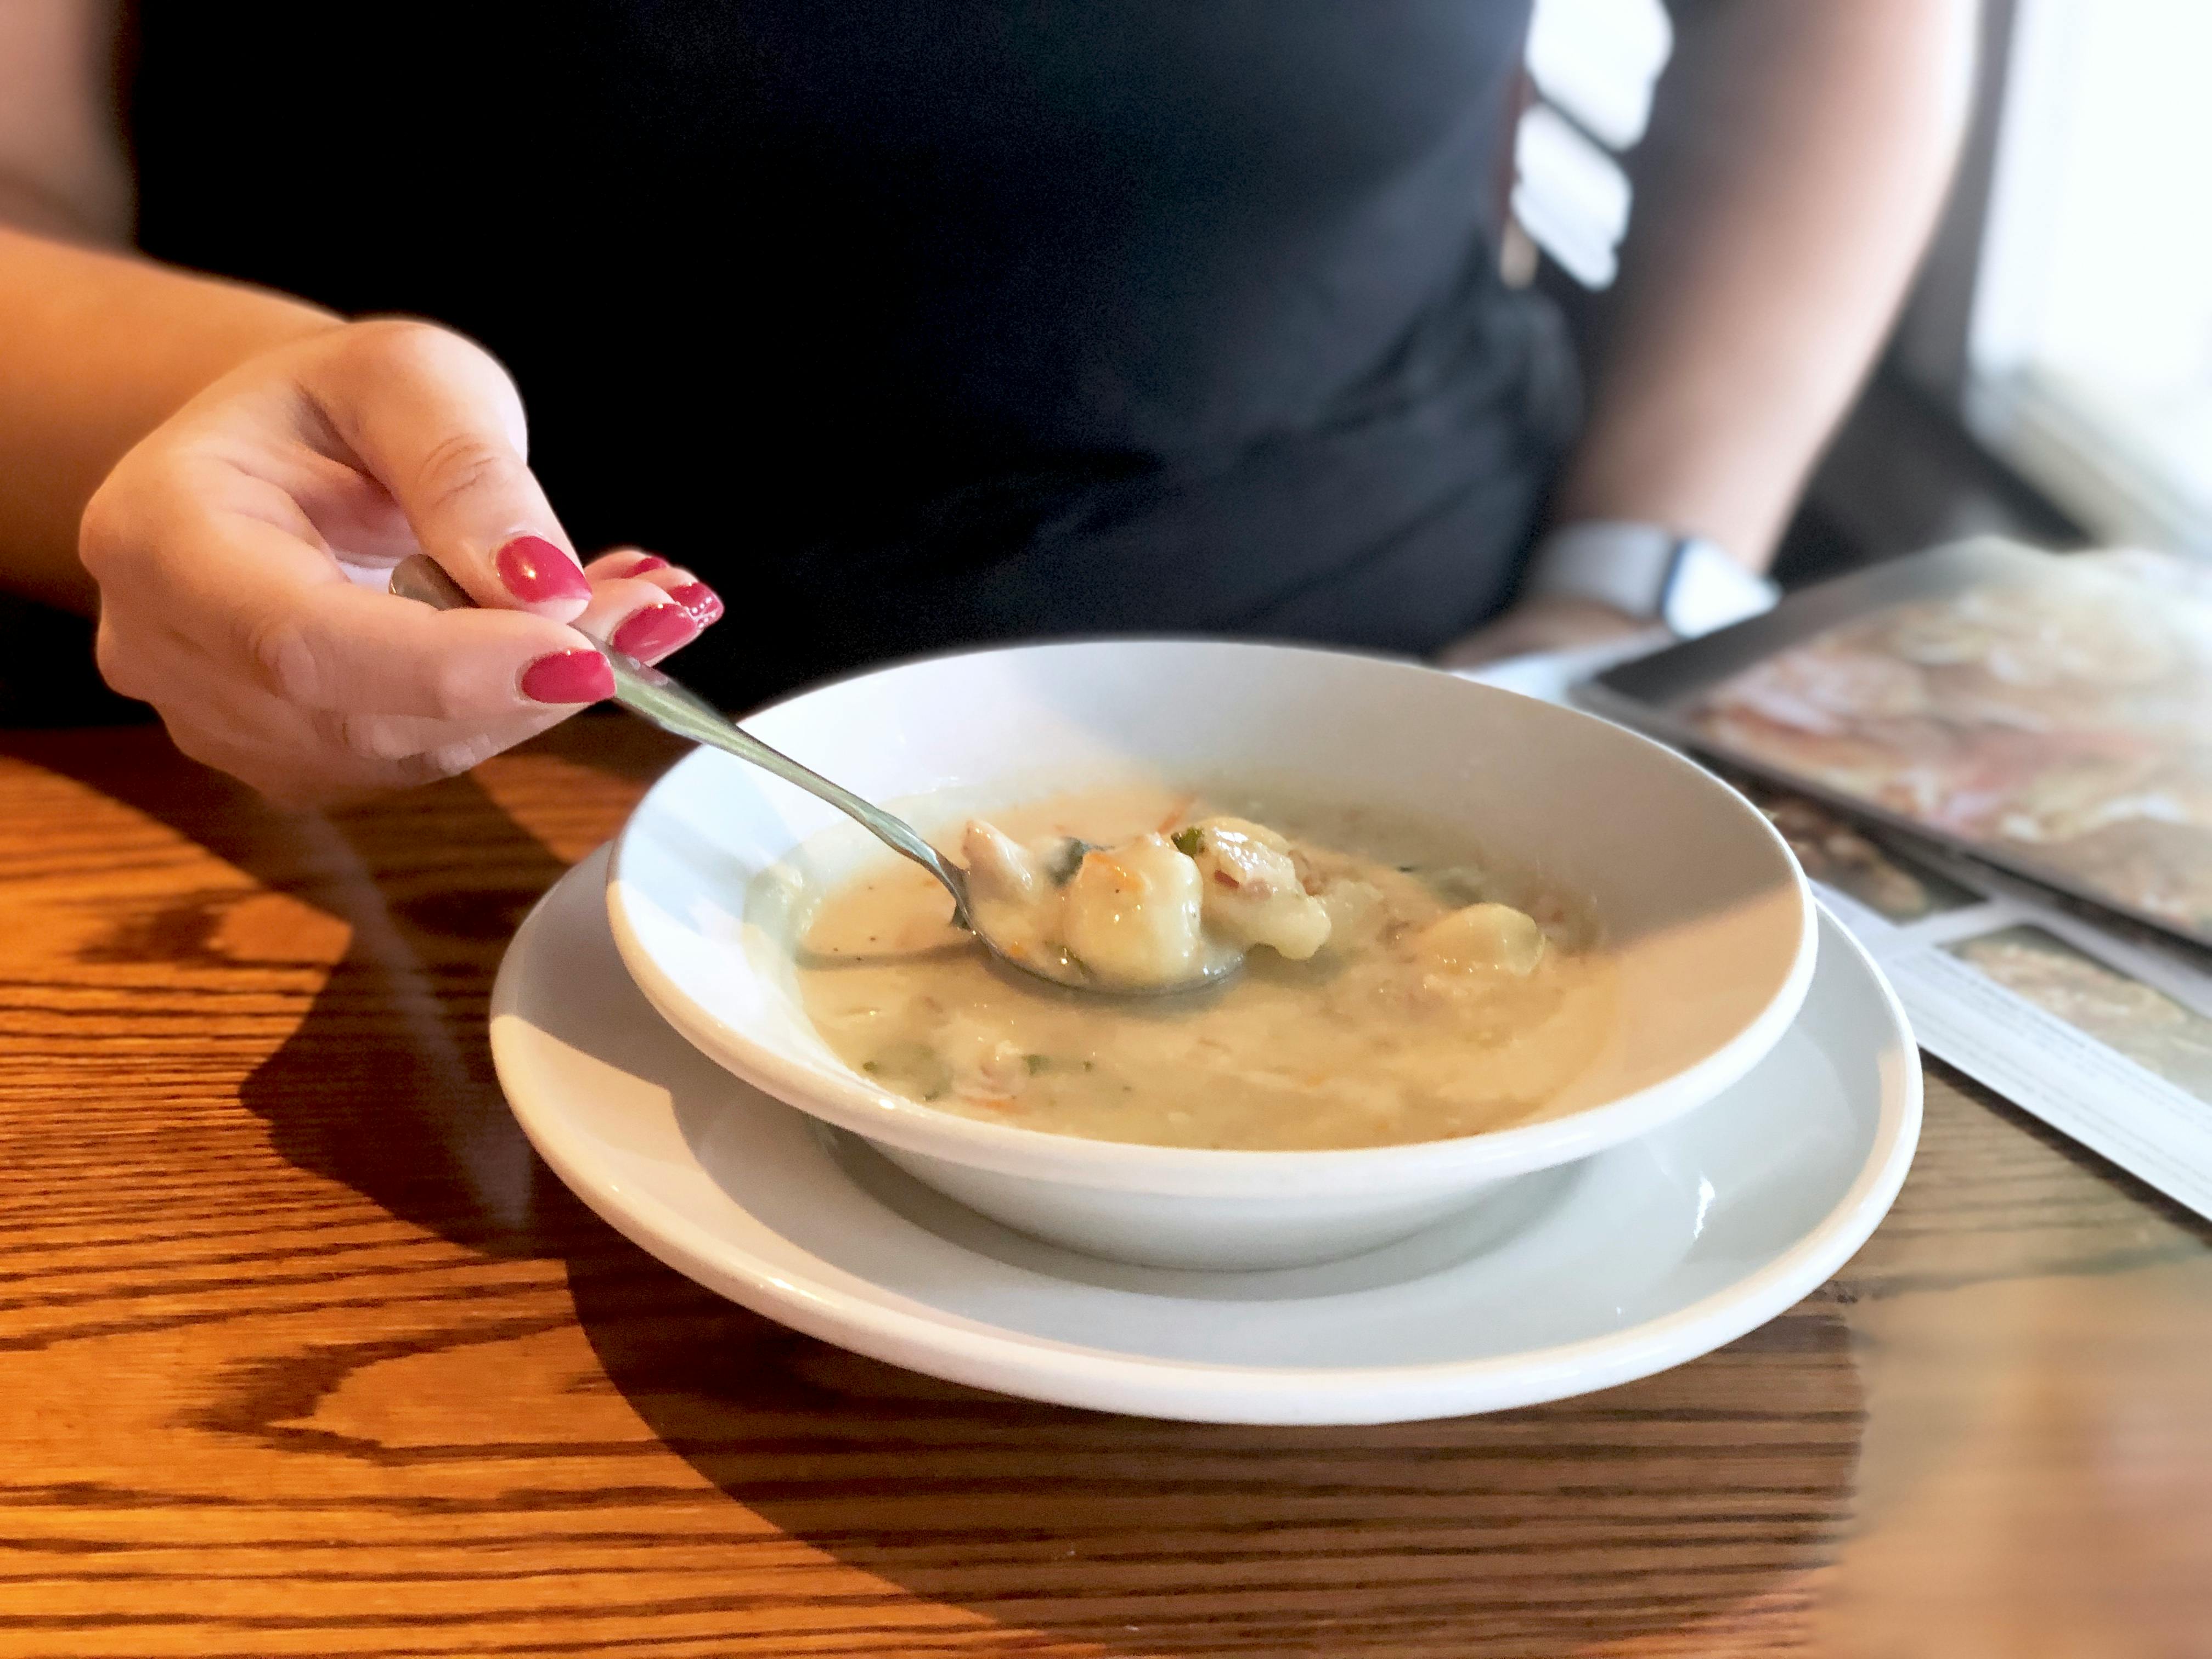 Olive Garden Hacks 24 Secrets Straight From Your Server The